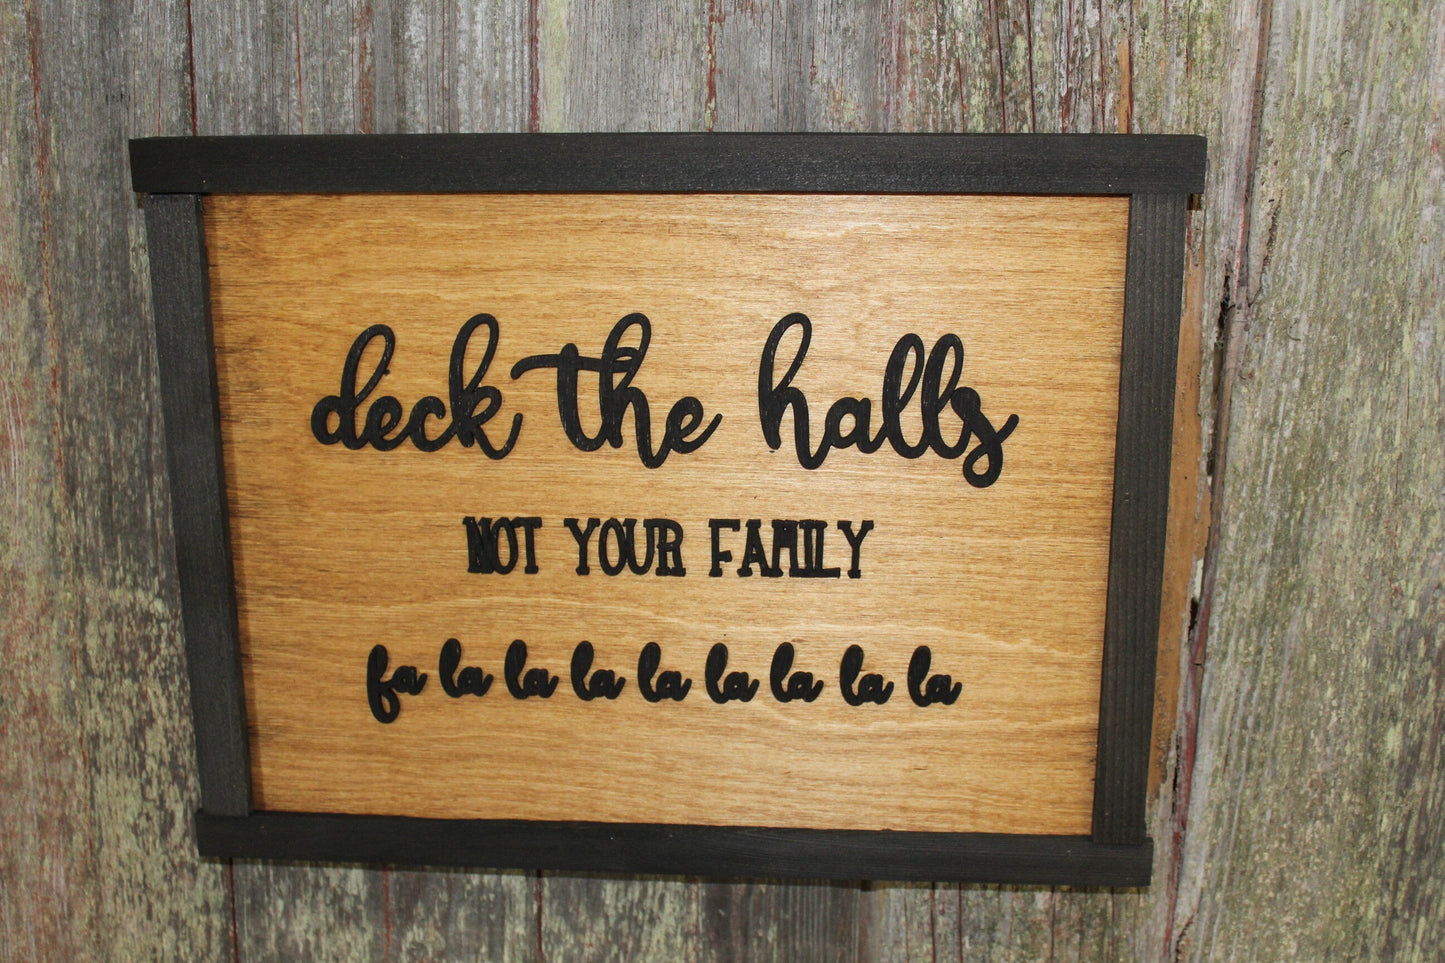 Deck The Halls Not Your Family Silly Christmas Wood Sign 3D Raised Text Christmas In The Country Rustic Barnwood Cabin Winter Sign Fa La La